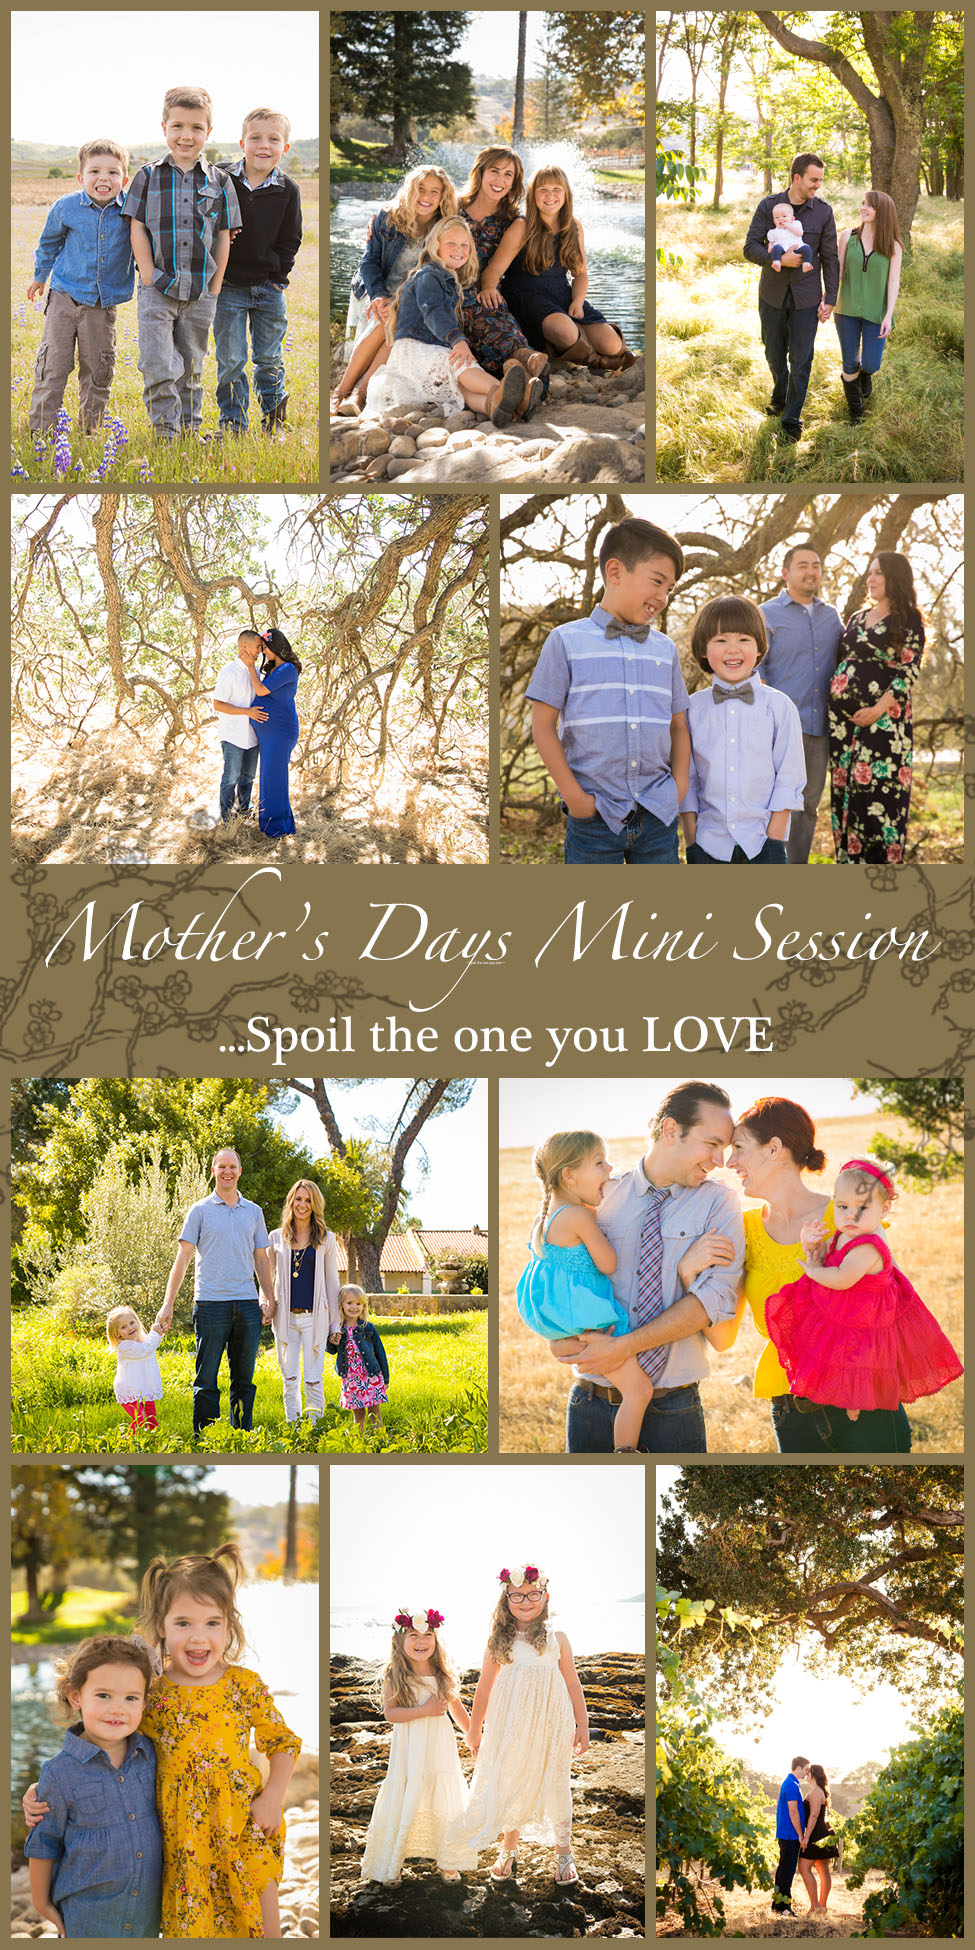 2018 Mother's Day Mini Sessions.jpg